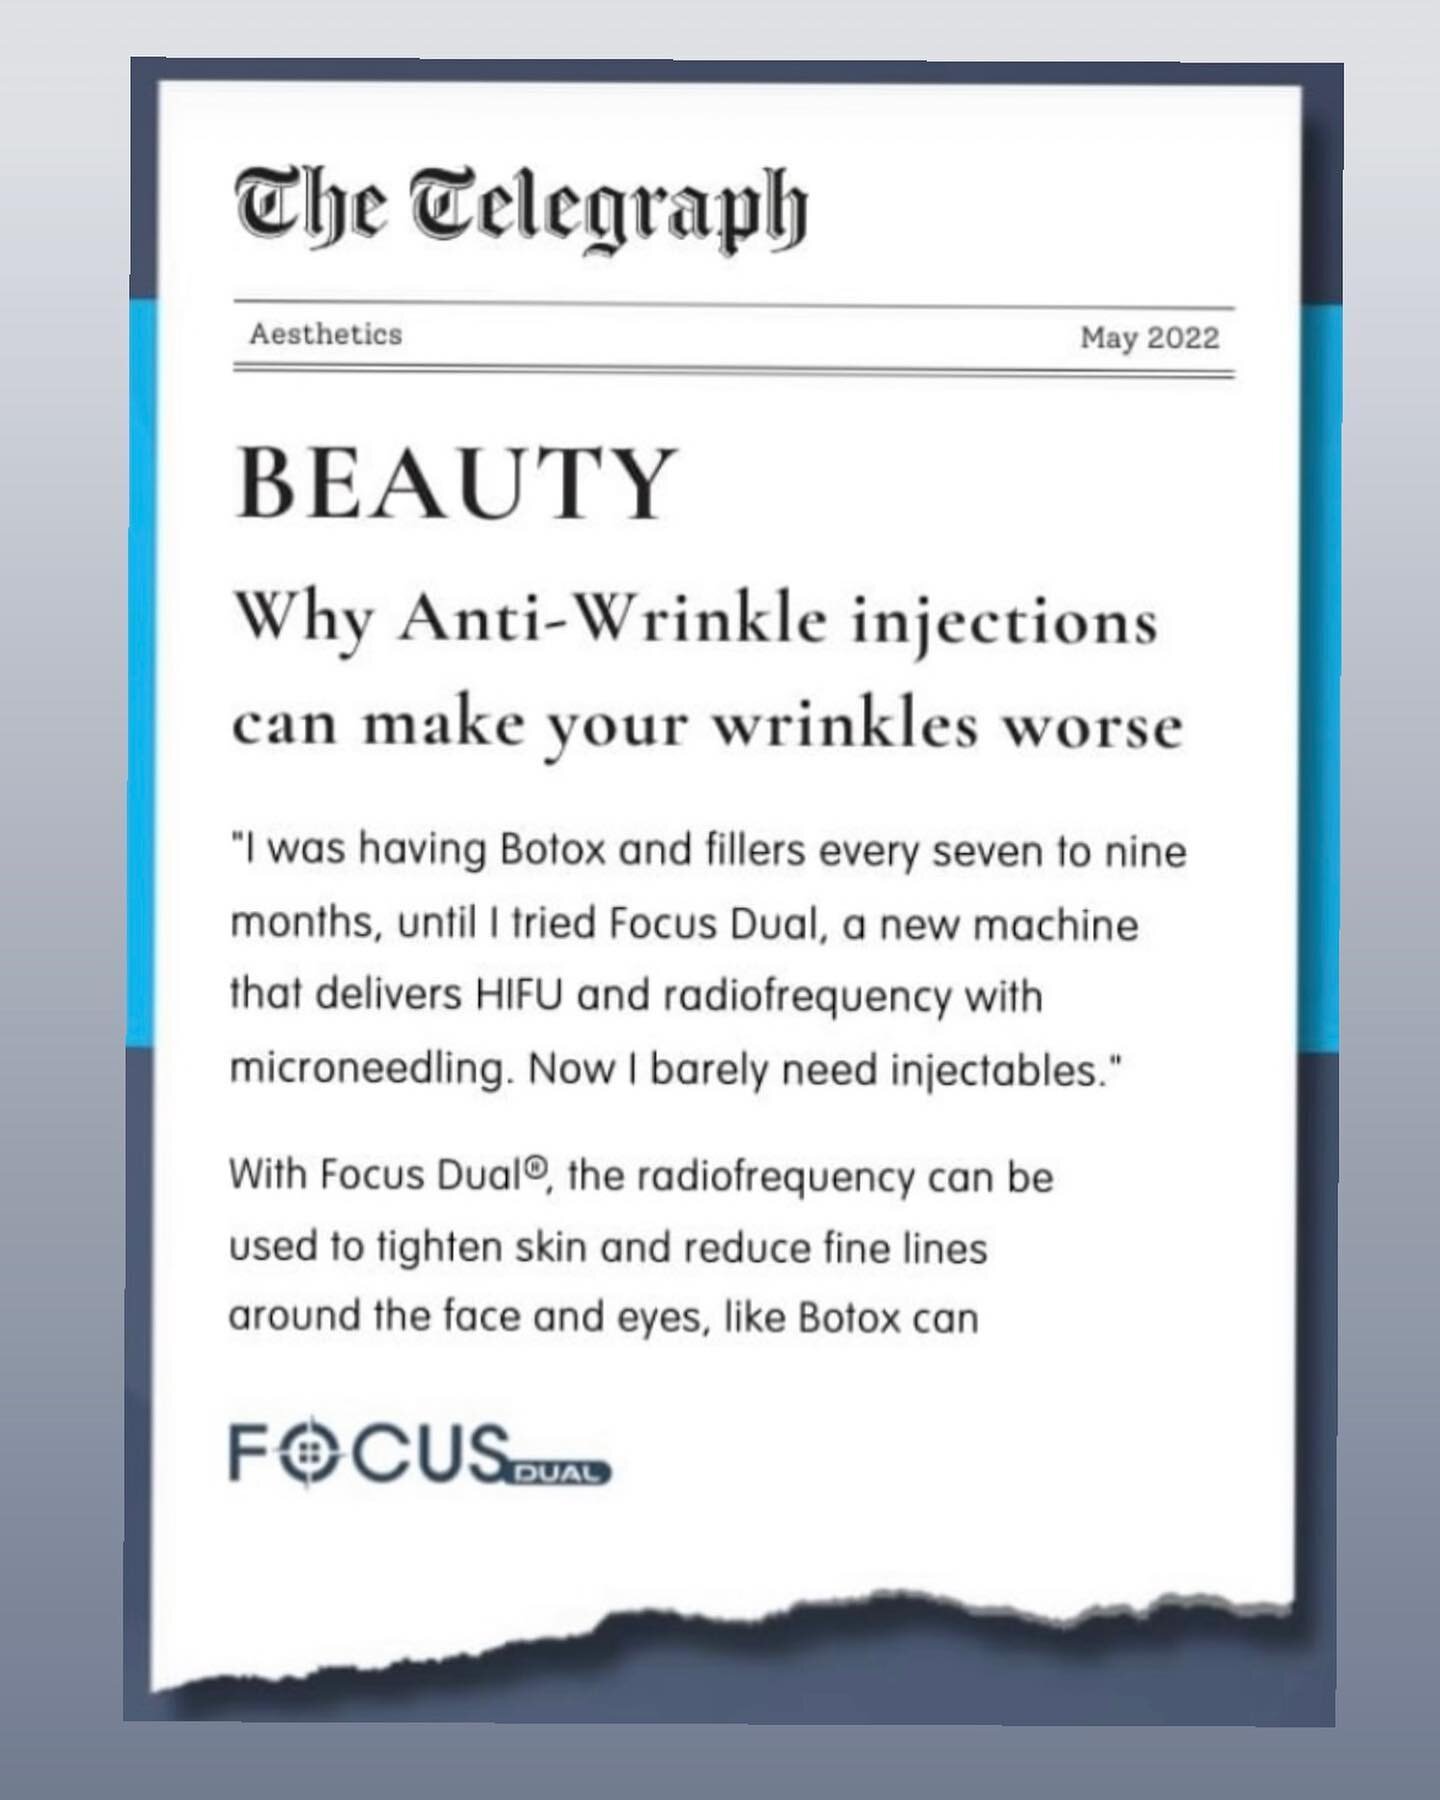 Who Has Botox ? This is a great read. Our incredible HIFU and microneedling device has been featured in The Telegraph! 

https://www.telegraph.co.uk/beauty/face/new-facial-tightening-treatment-better-botox/

Focus Dual&reg; has quickly developed a re